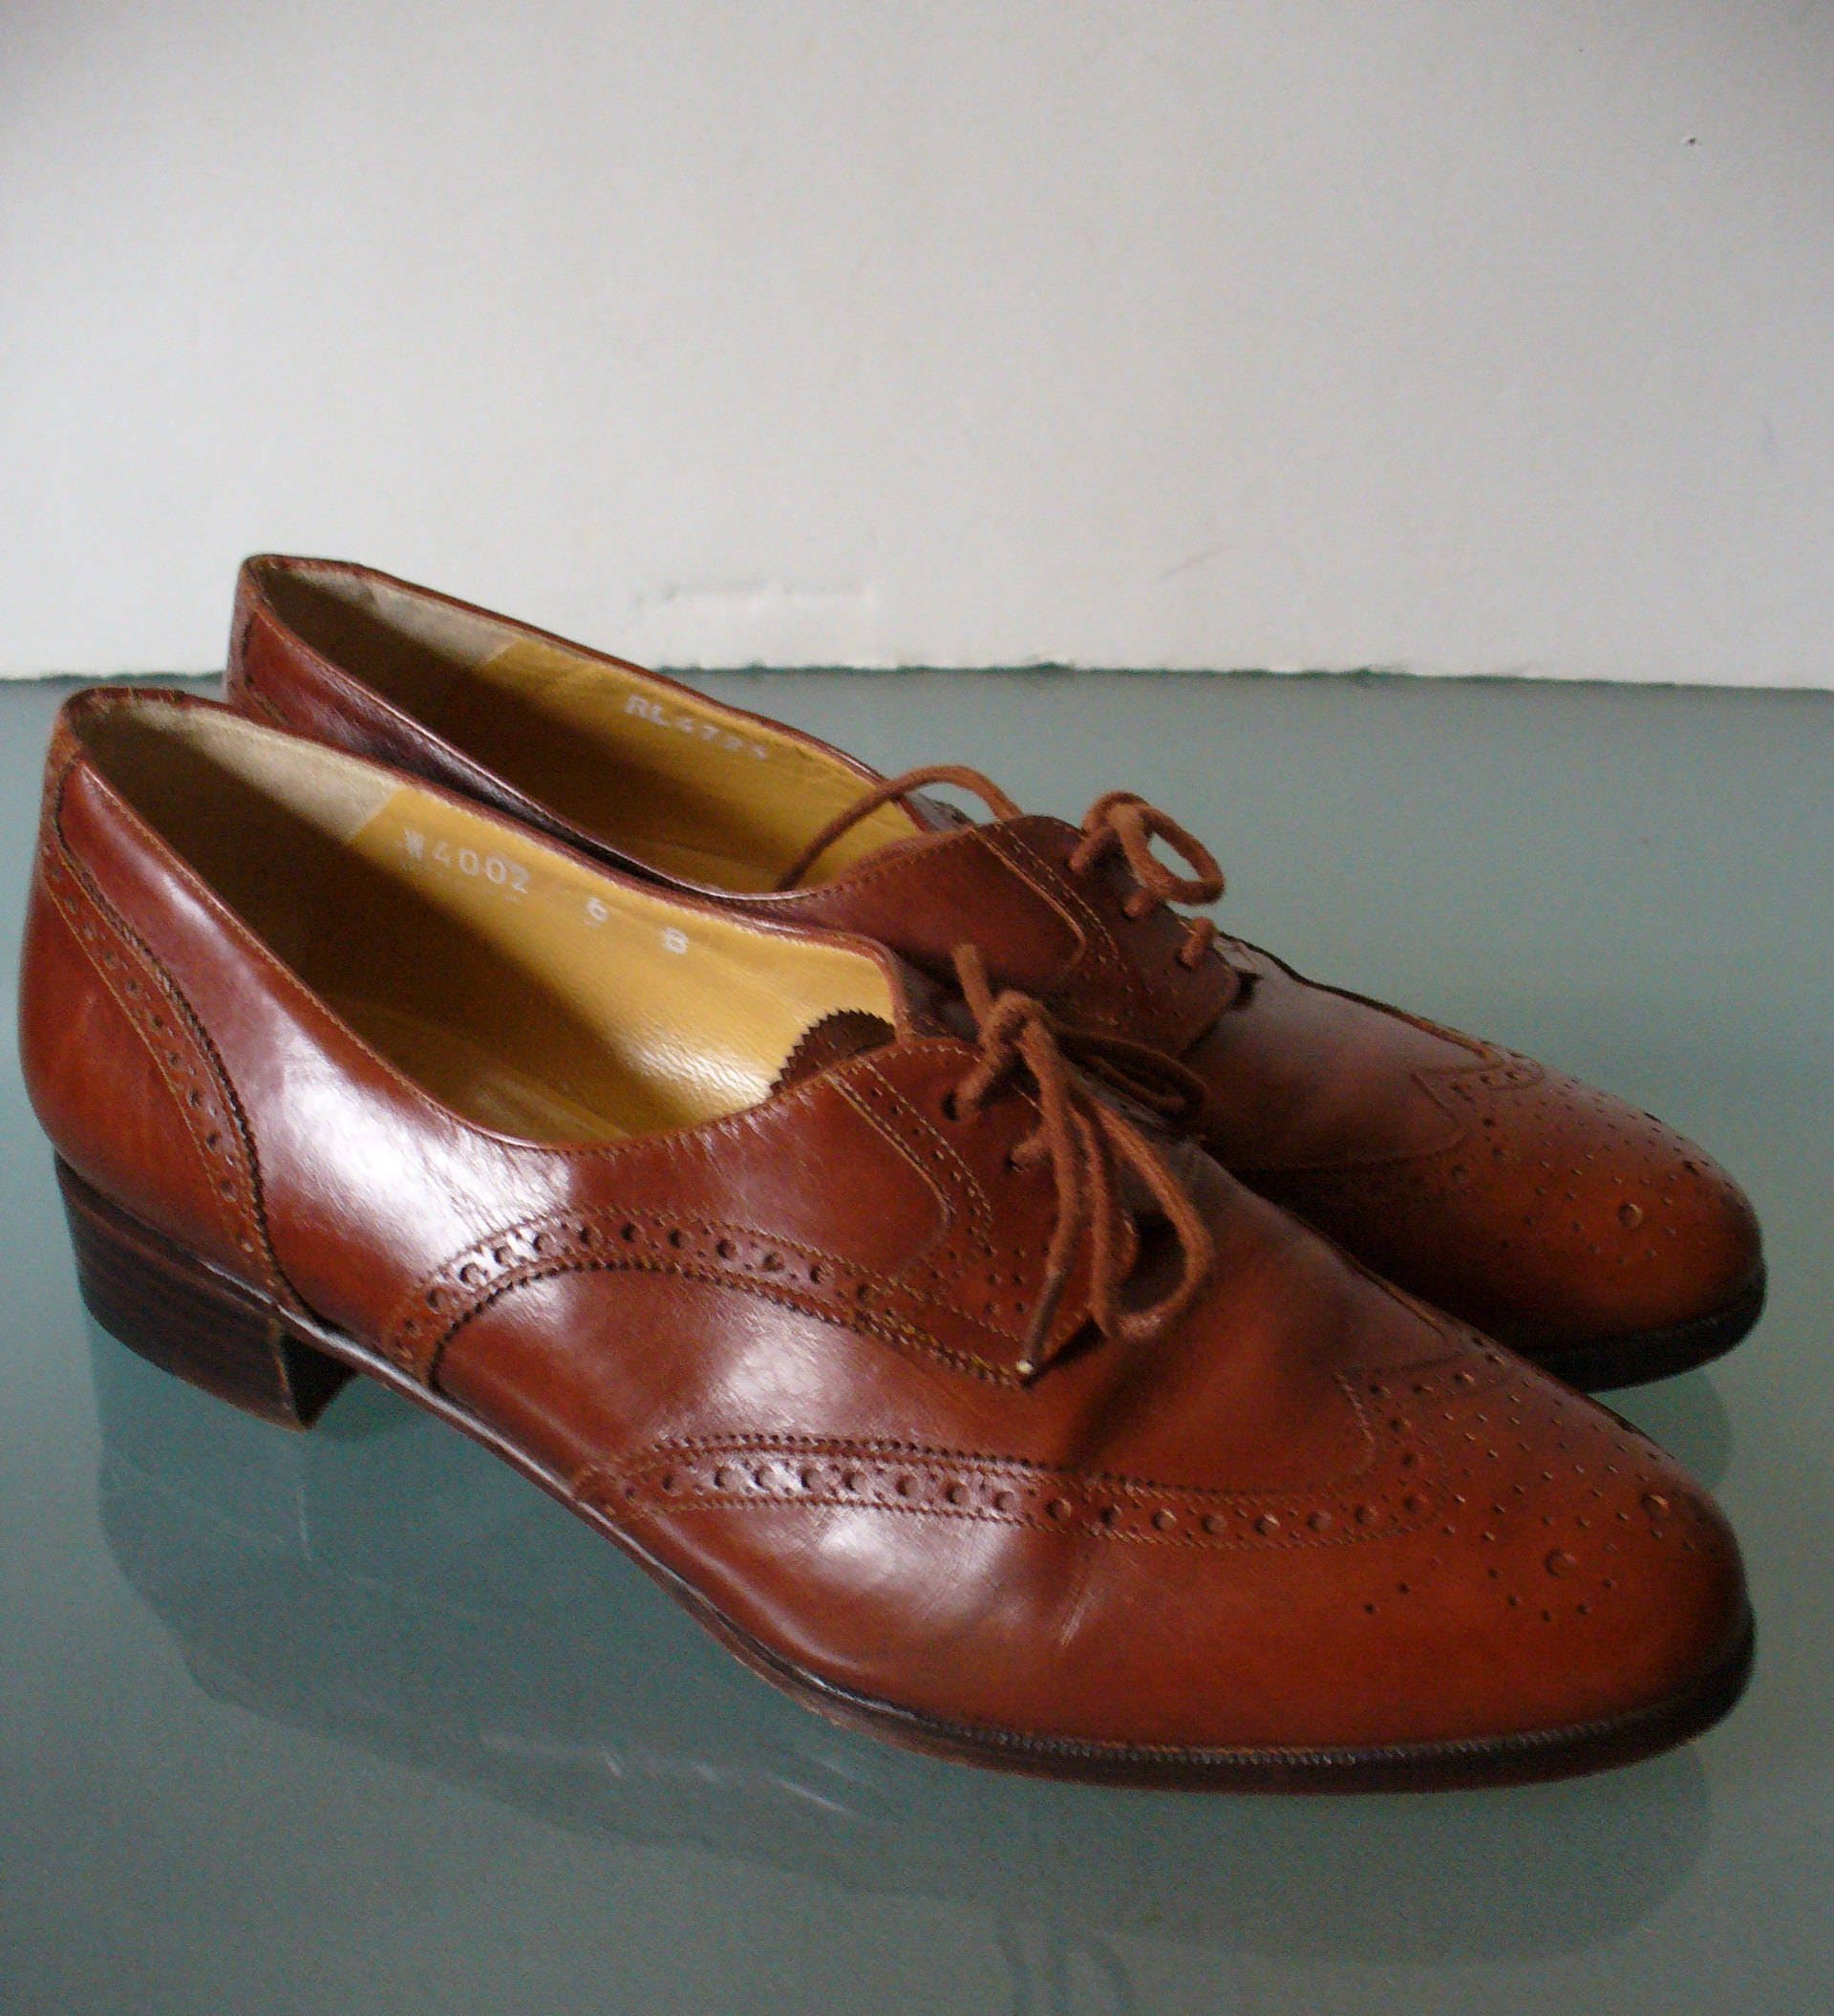 Vintage Ralph Lauren Wingtip Oxford Made in Italy Shoes Size 6 B